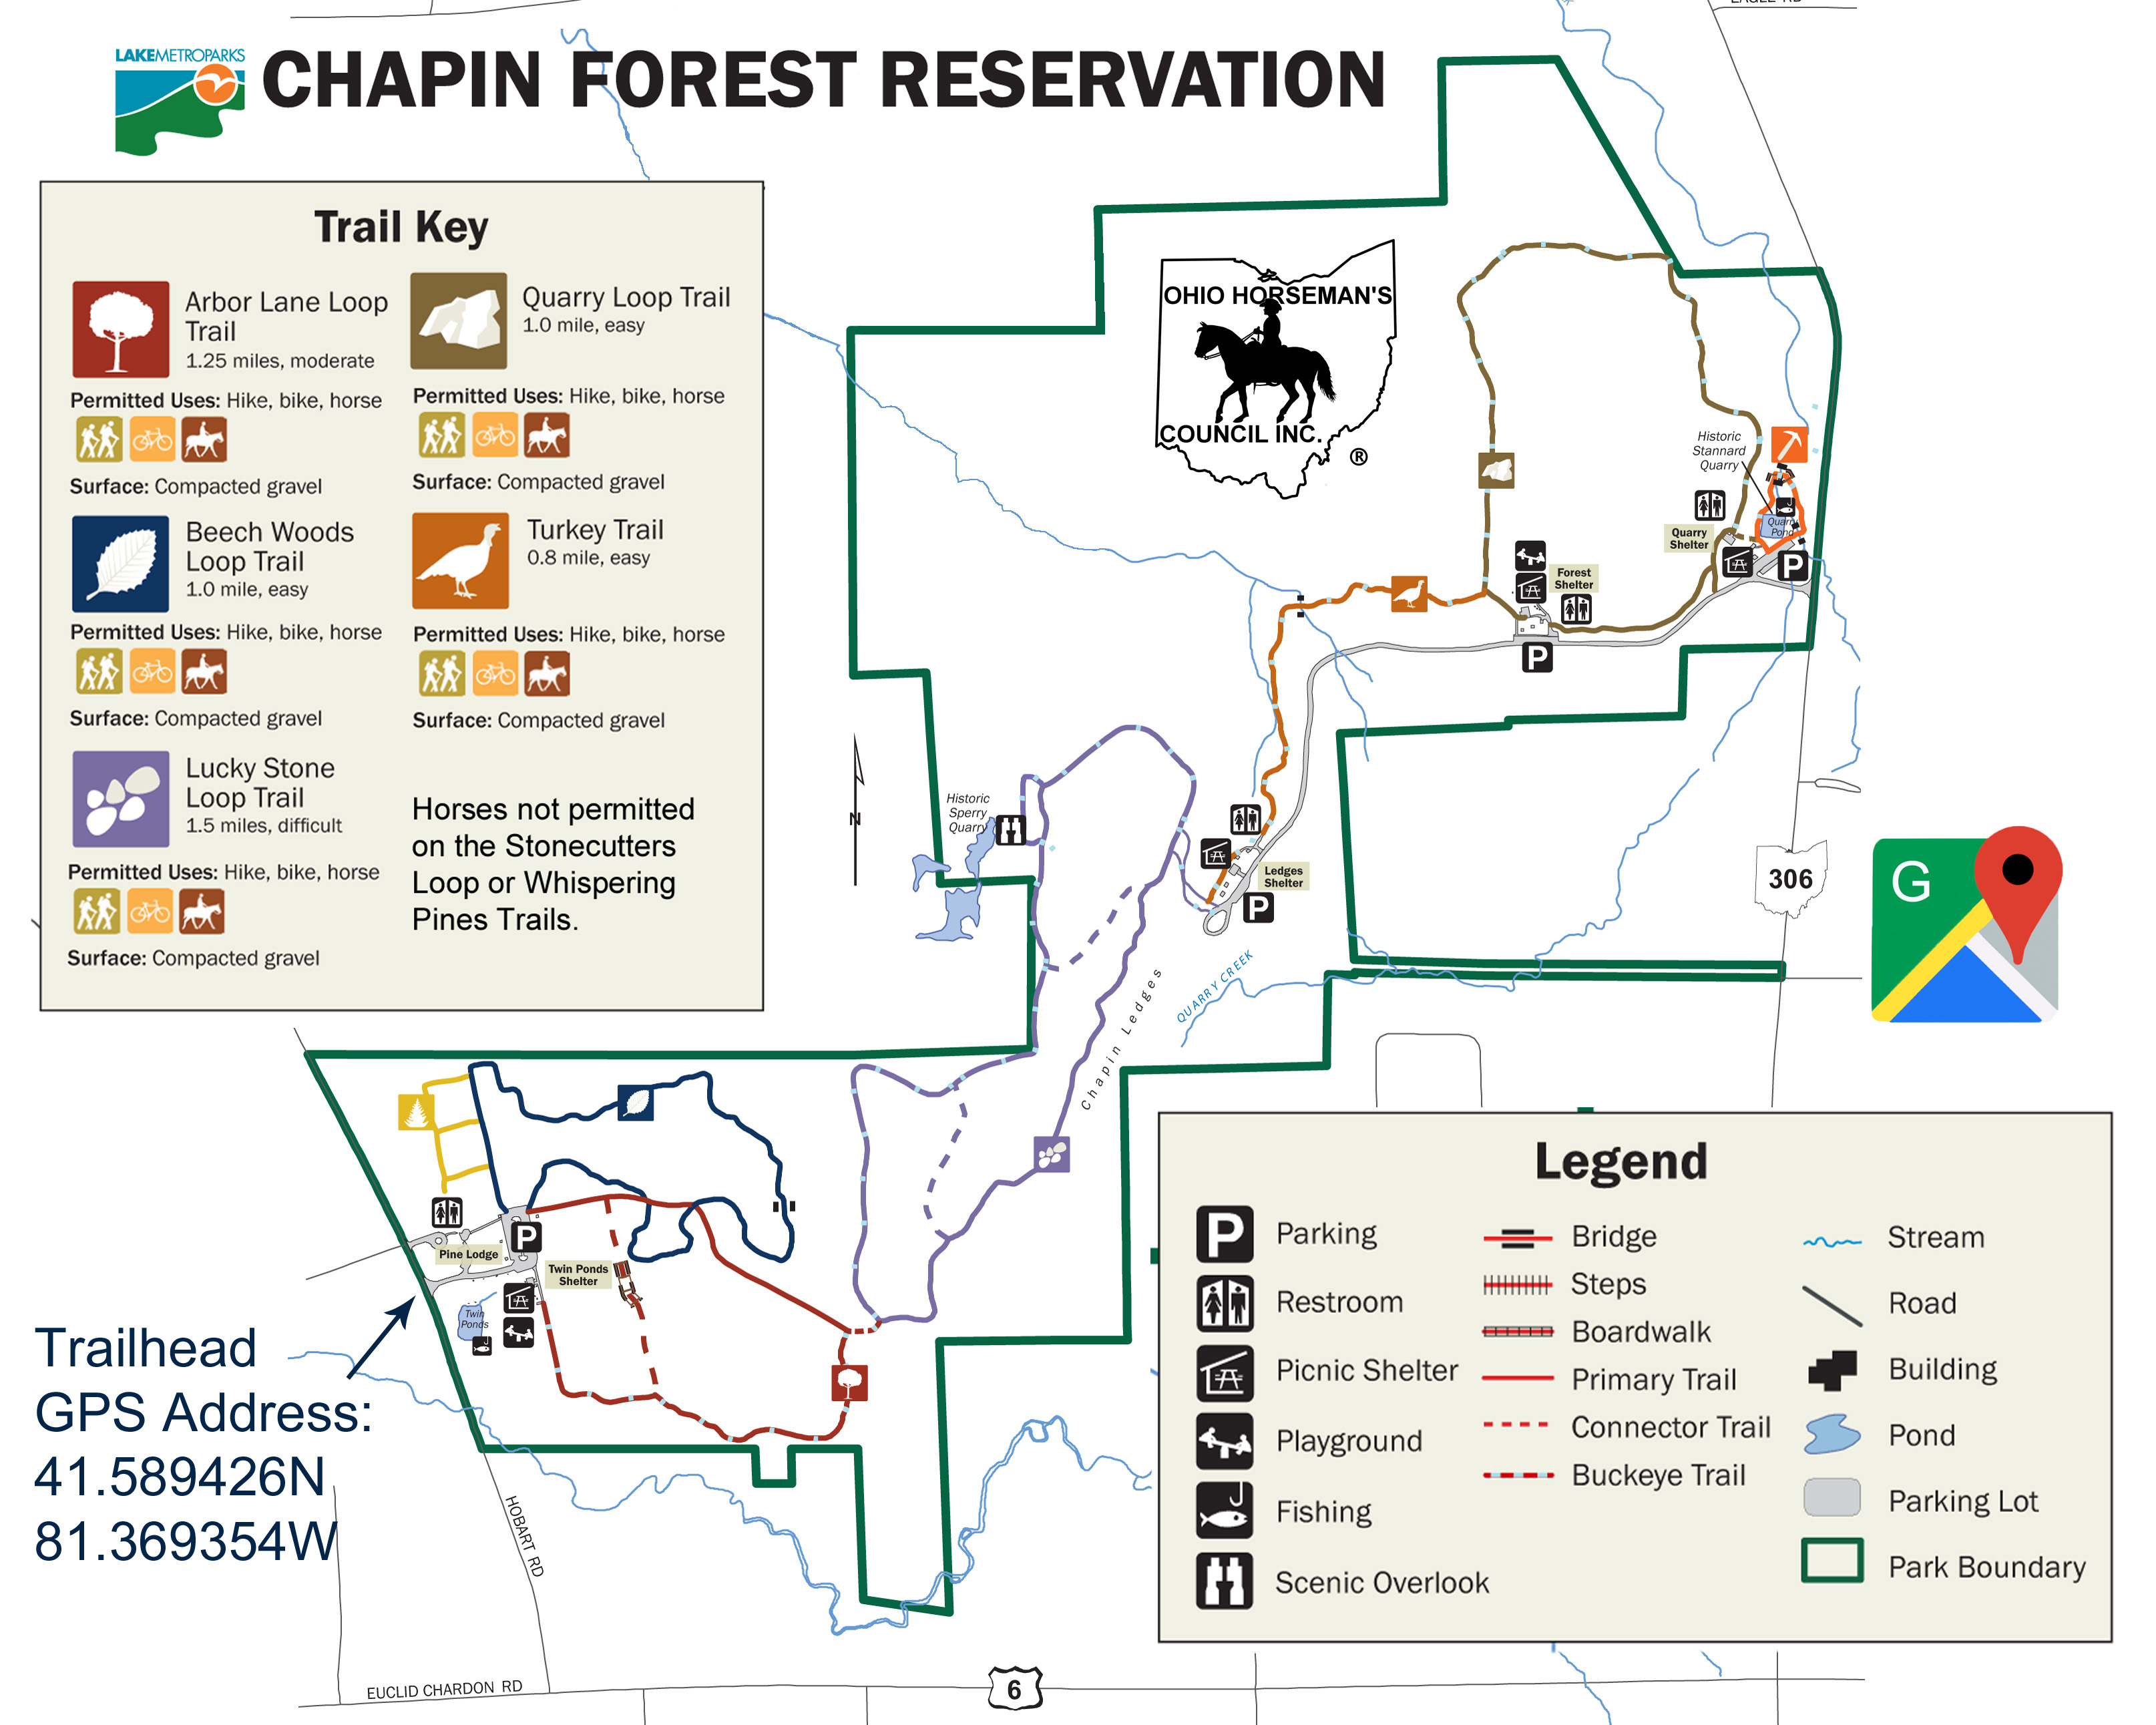 Chapin Forest Reservation